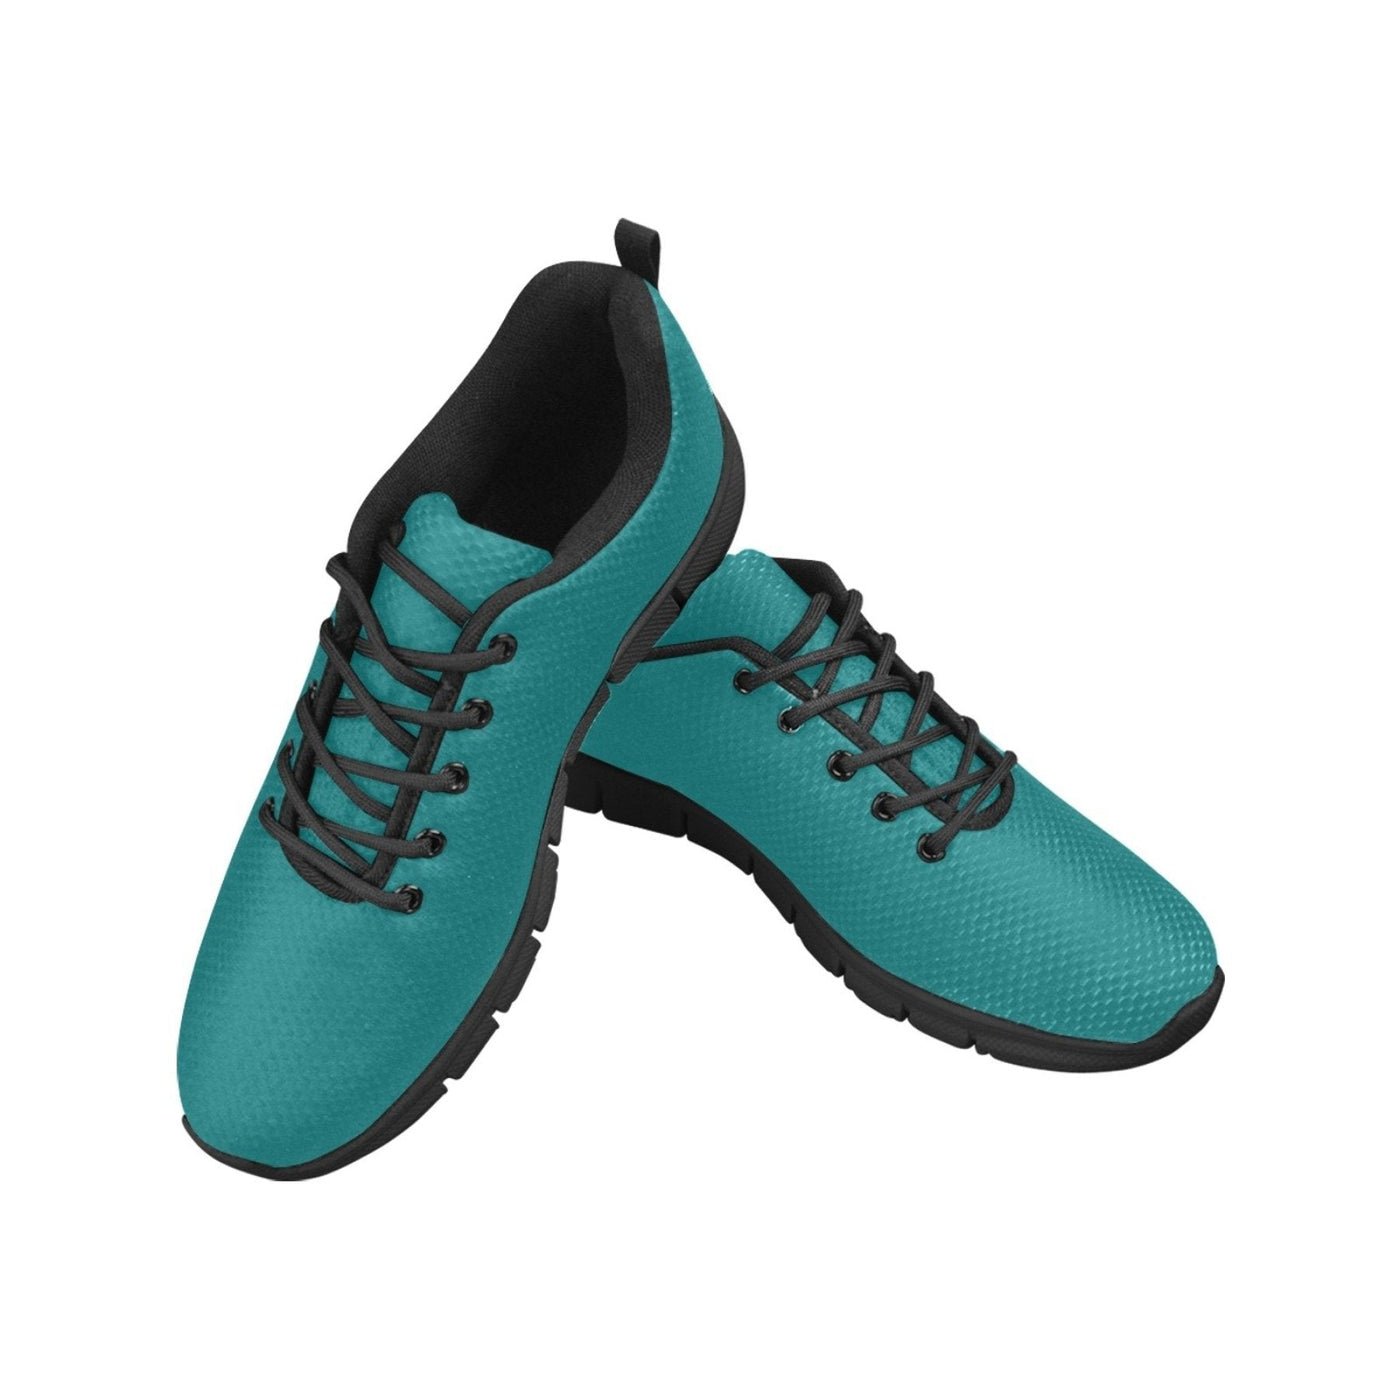 Womens Sneakers Teal Green Running Shoes - Womens | Sneakers | Running